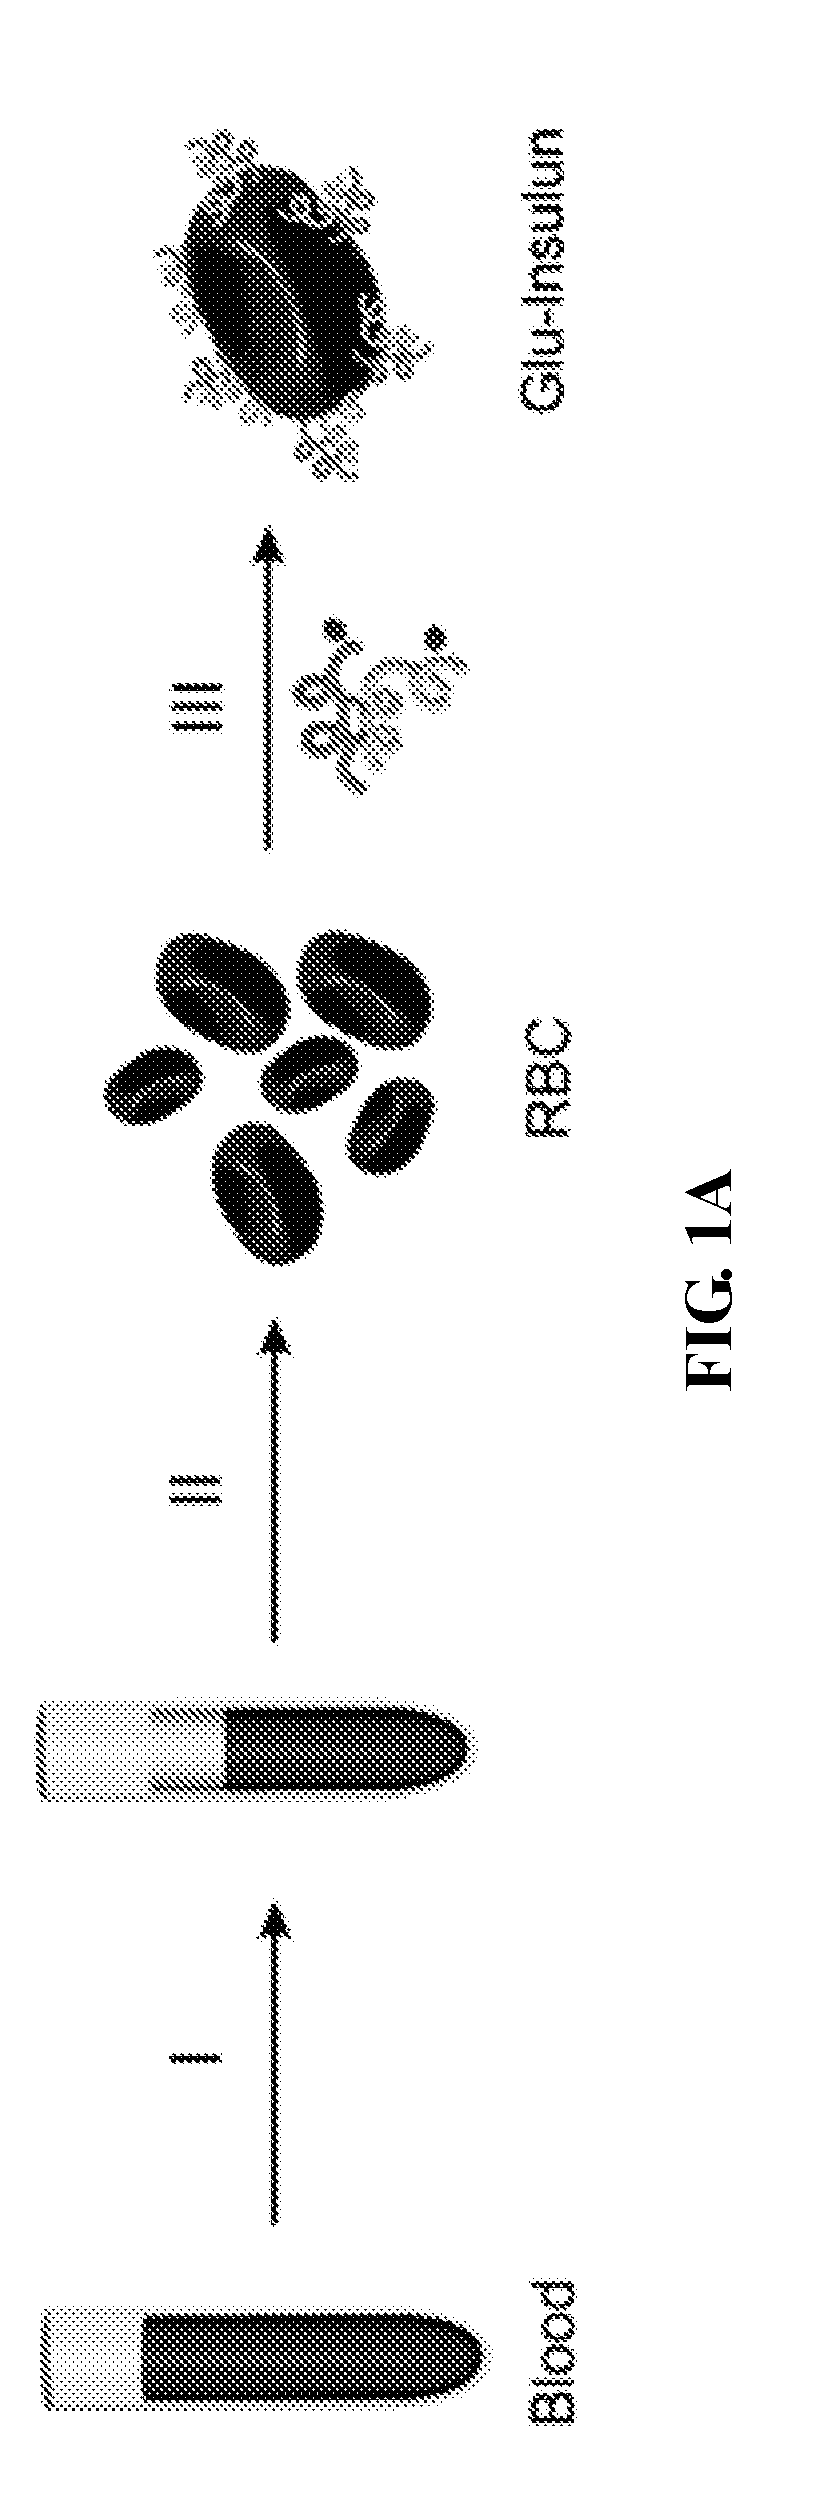 Glucose responsive insulin delivery compositions and methods